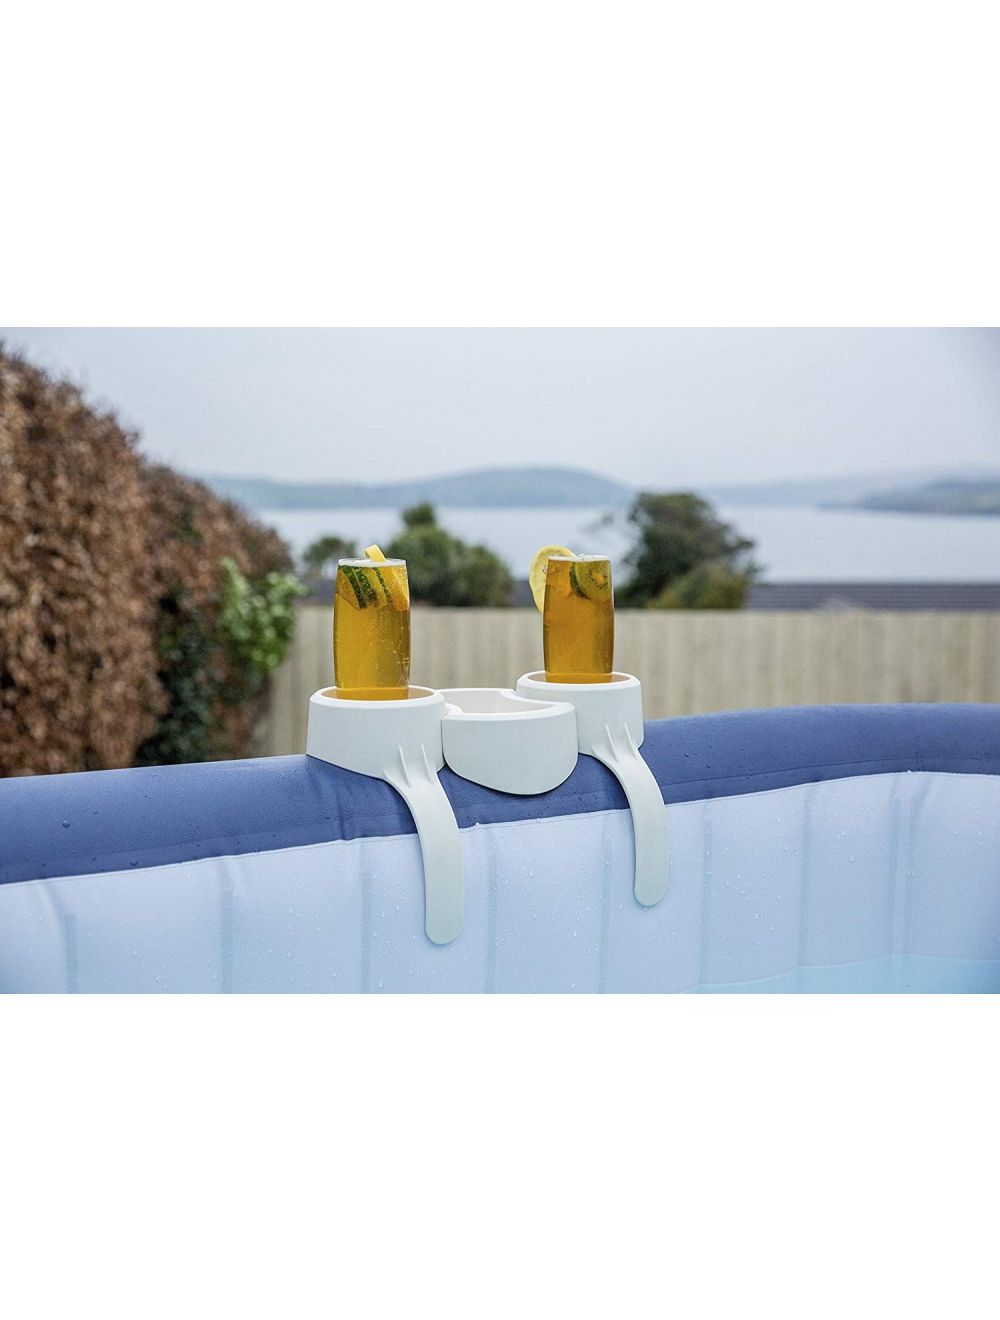 Lay-Z-Spa Handy Jacuzzi Hot Tub Drinks Food Holder Inflatable Spa Accessory 